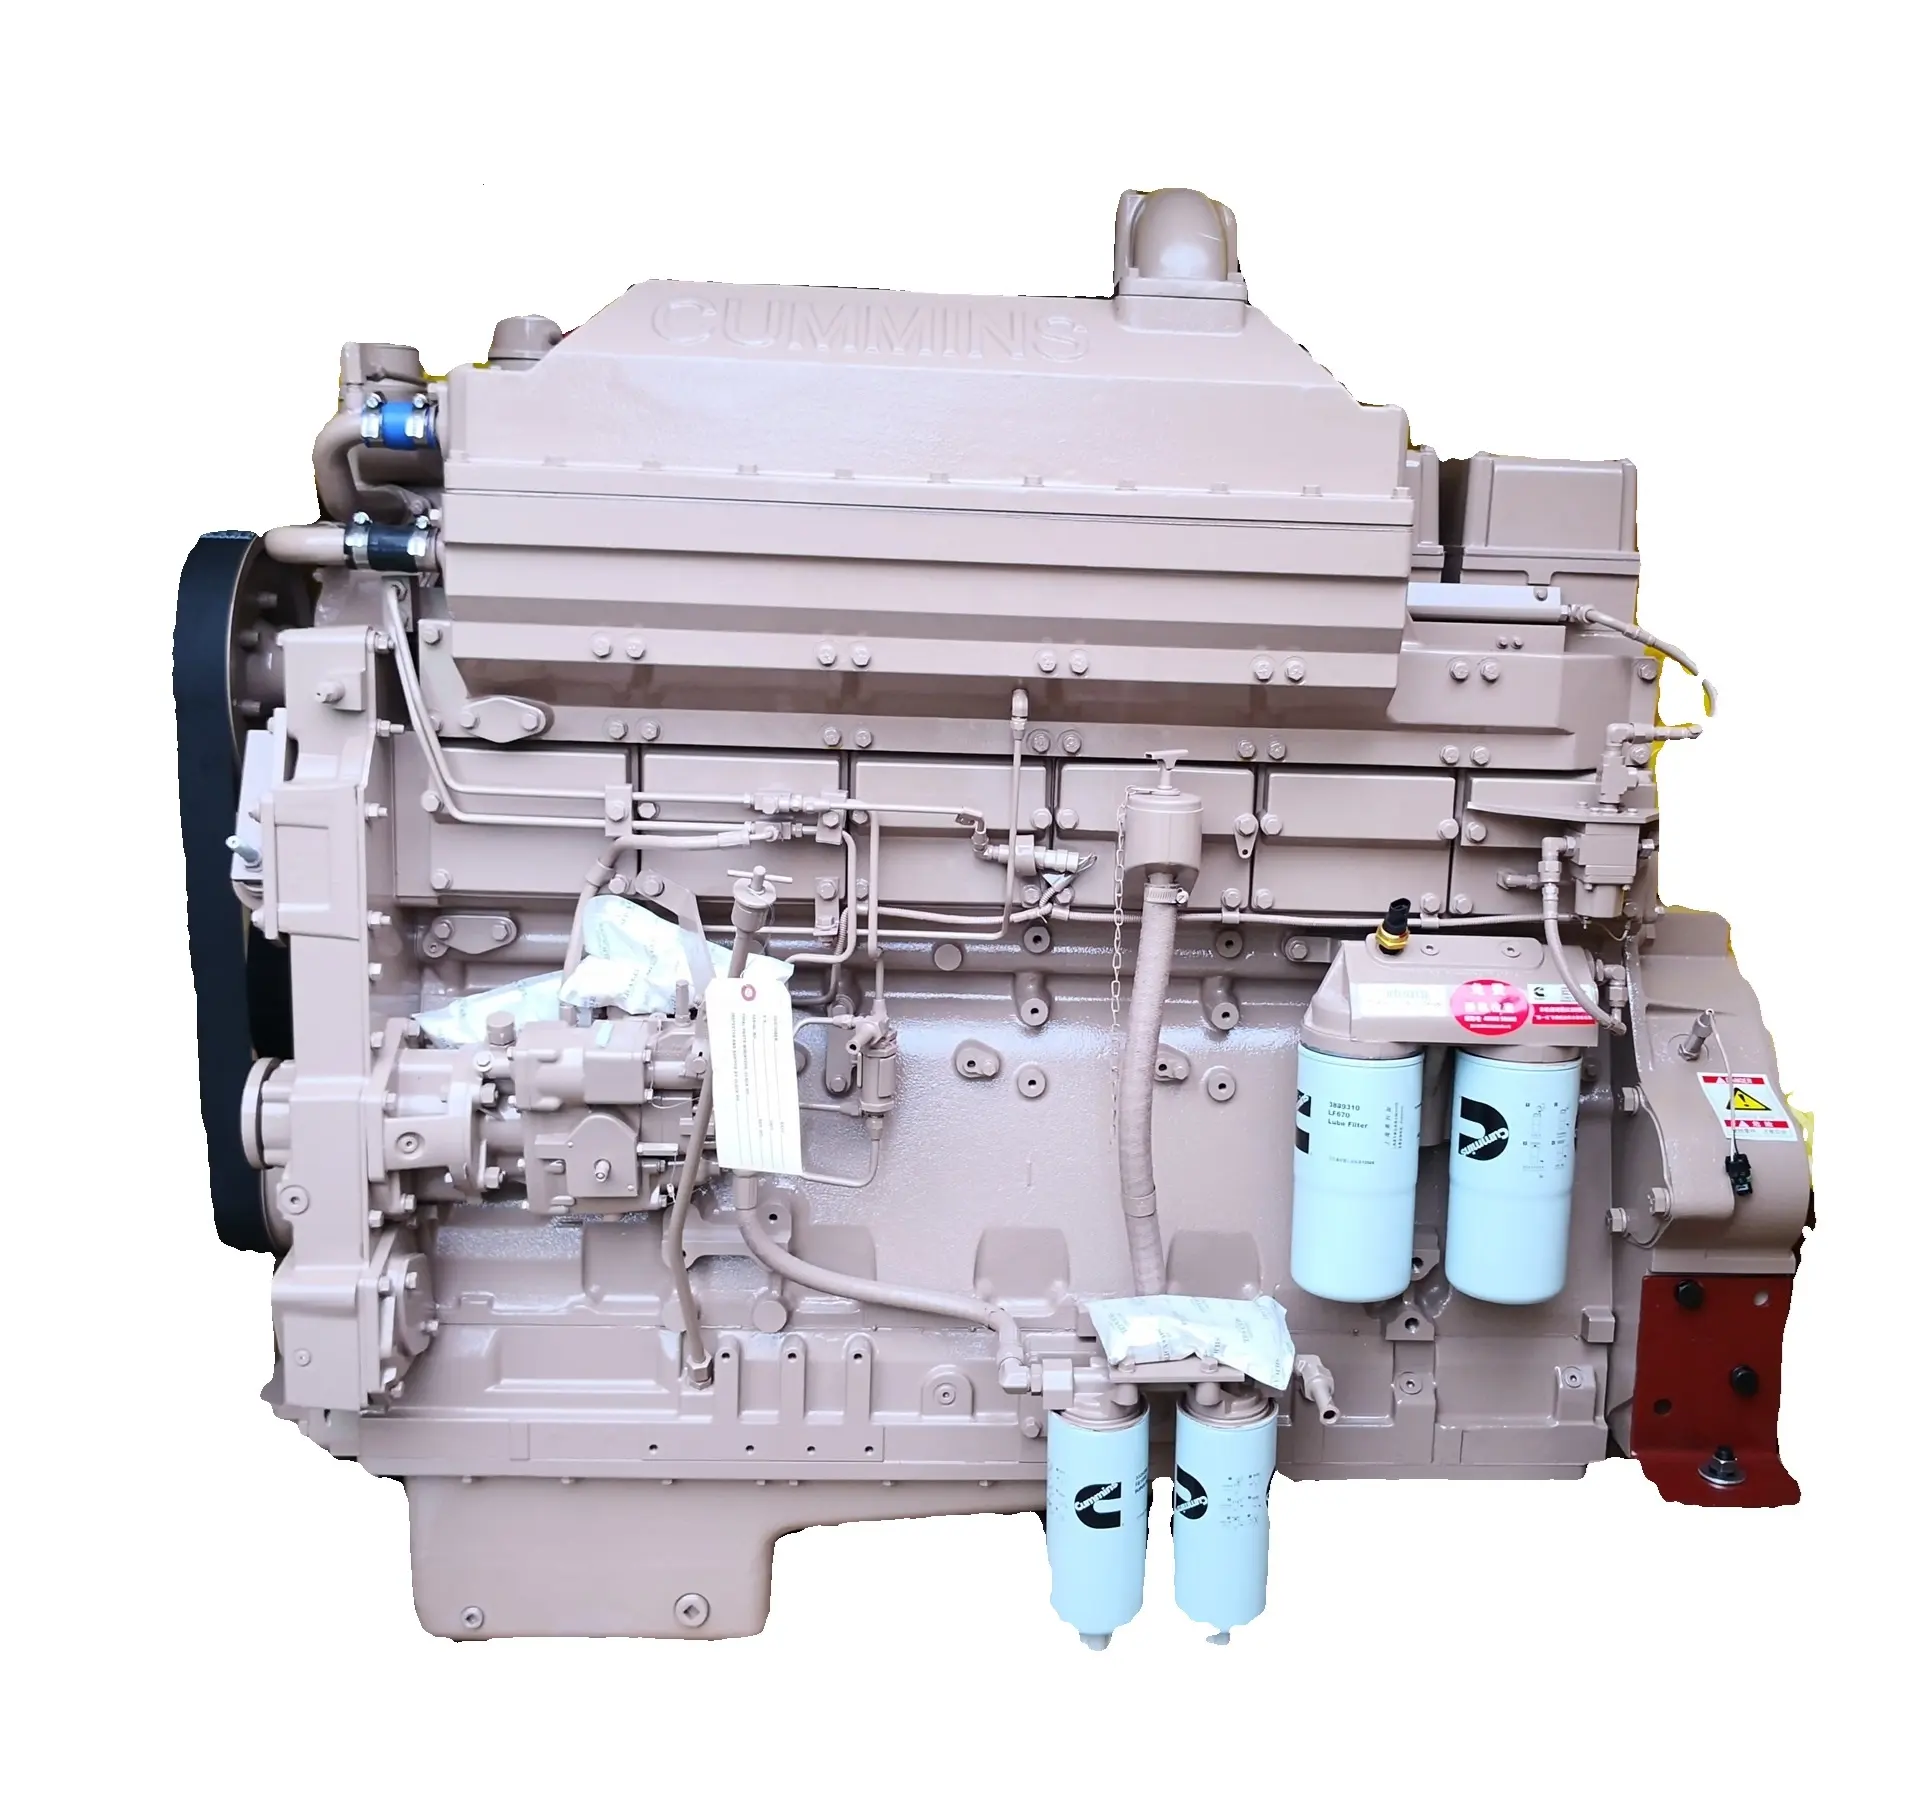 CUMMINS KTTA19-C700 engine booking according to customers special request